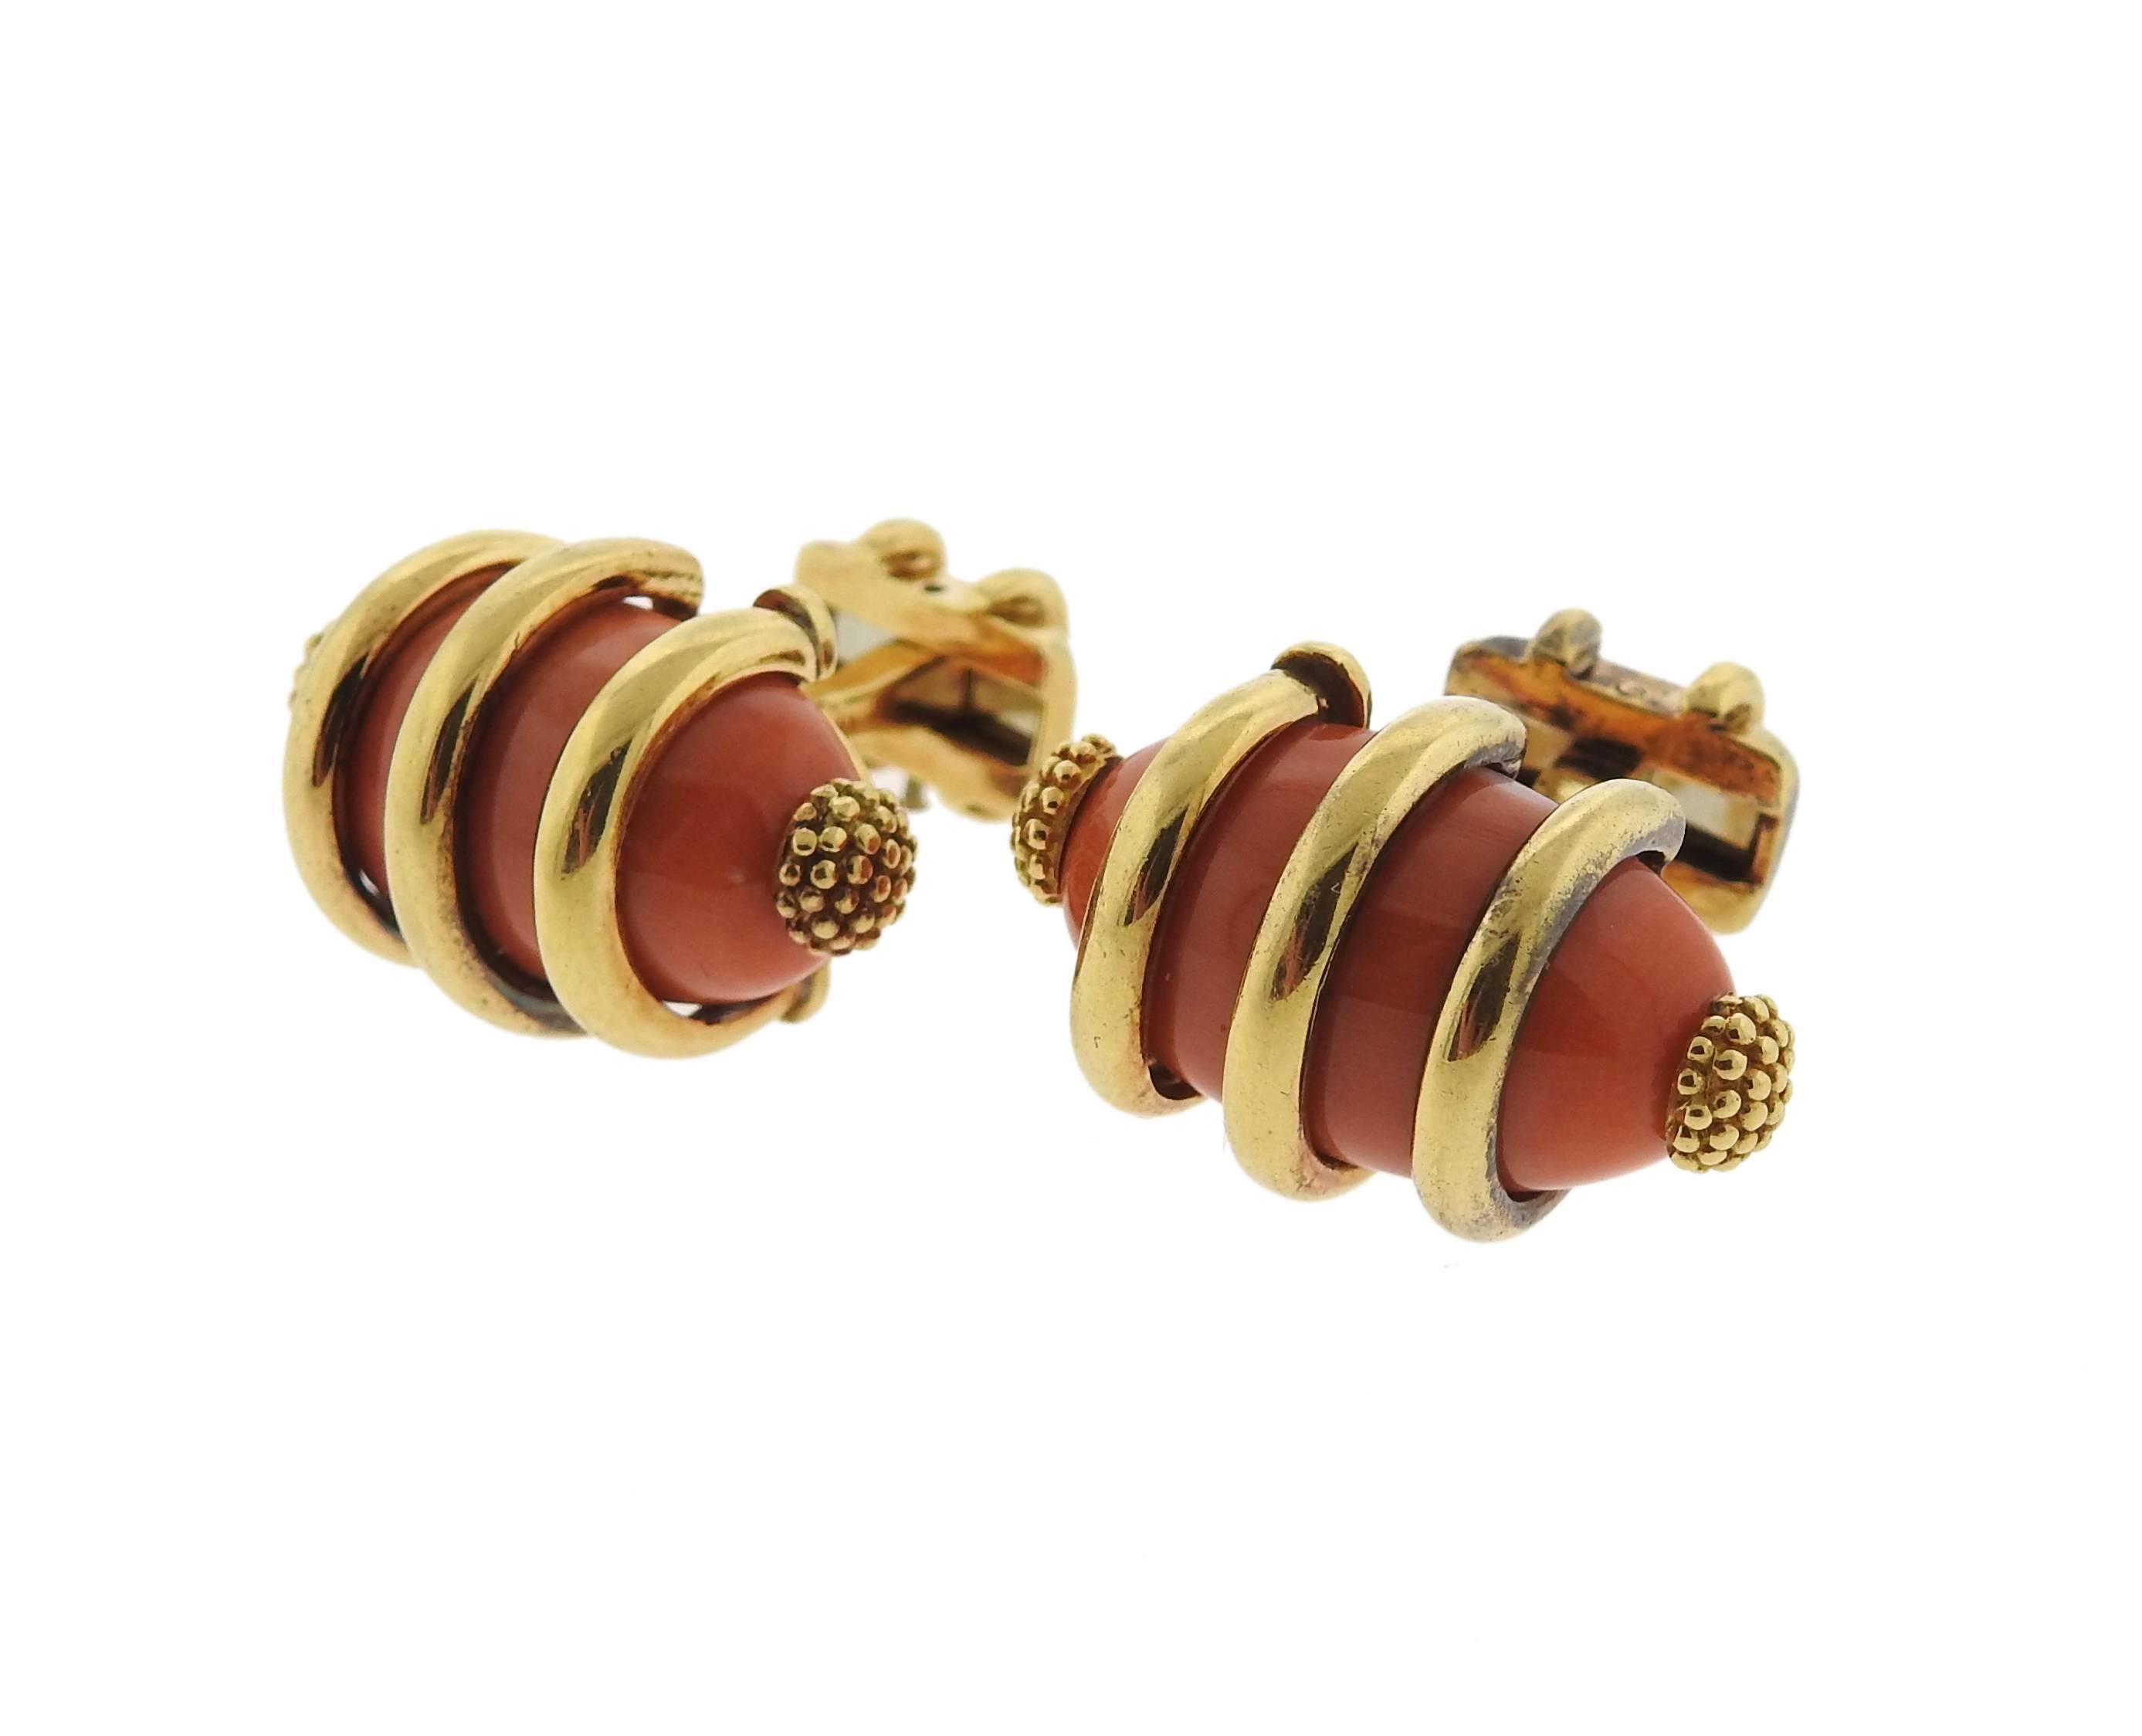 Massive French Gold Coral Cufflinks In Excellent Condition For Sale In Lambertville, NJ